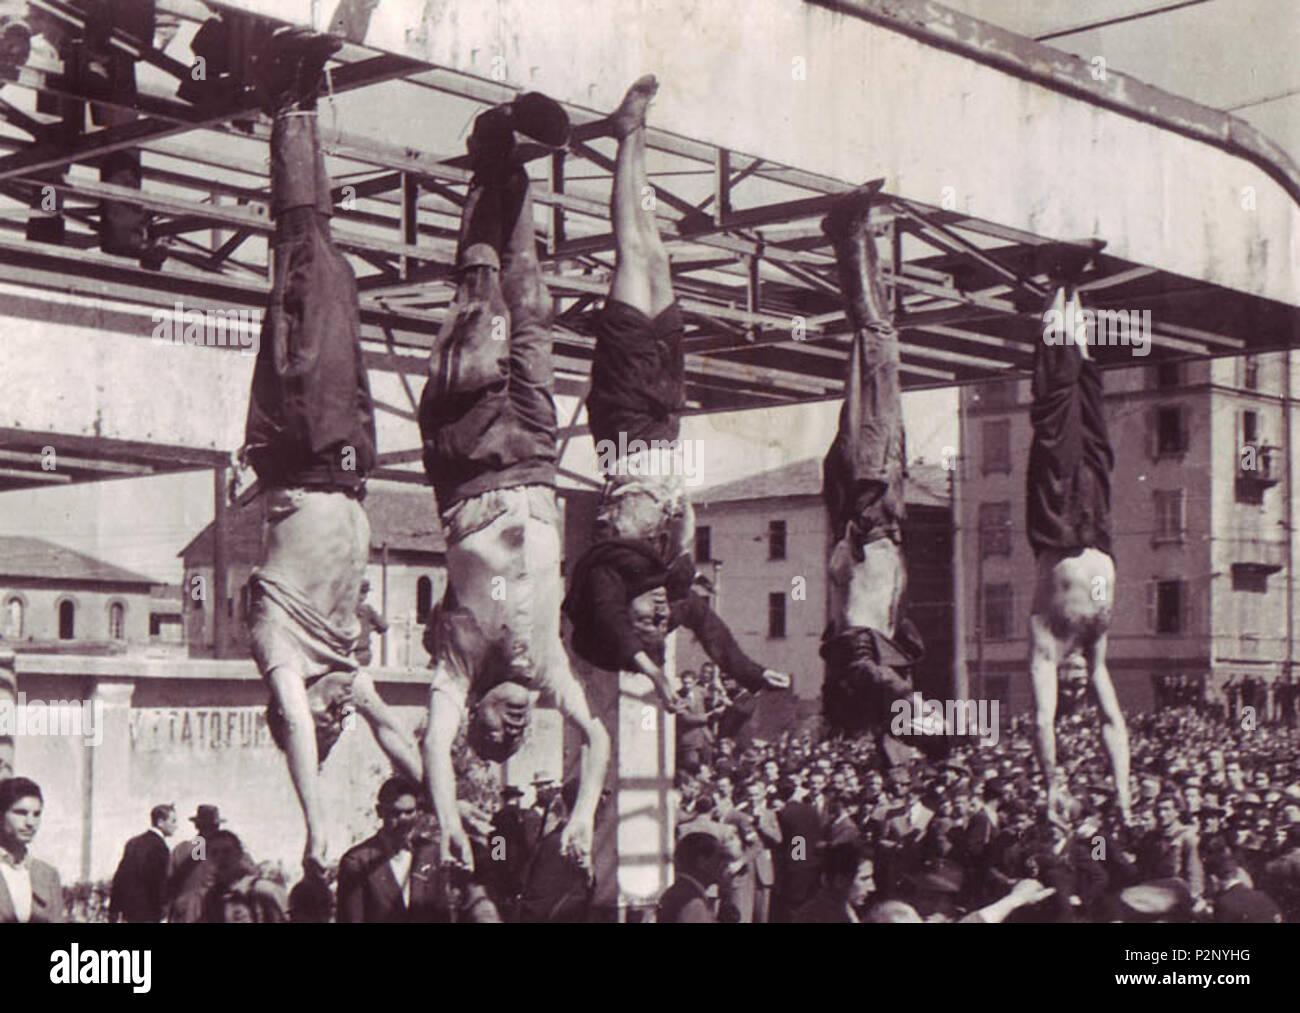 . English: The dead body of Benito Mussolini next to his mistress Claretta Petacci and those of other executed fascists, on display in Milan on 29 April 1945, in Piazzale Loreto, the same place that the fascists had displayed the bodies of fifteen Milanese civilians a year earlier after executing them in retaliation for resistance activity. The photograph is by Vincenzo Carrese. The bodies, from left to right, are: Nicola Bombacci Benito Mussolini Claretta Petacci Alessandro Pavolini Achille Starace  Deutsch: Die Leichen von Benito Mussolini, seiner Gefährtin Claretta Petacci und anderer fasch Stock Photo